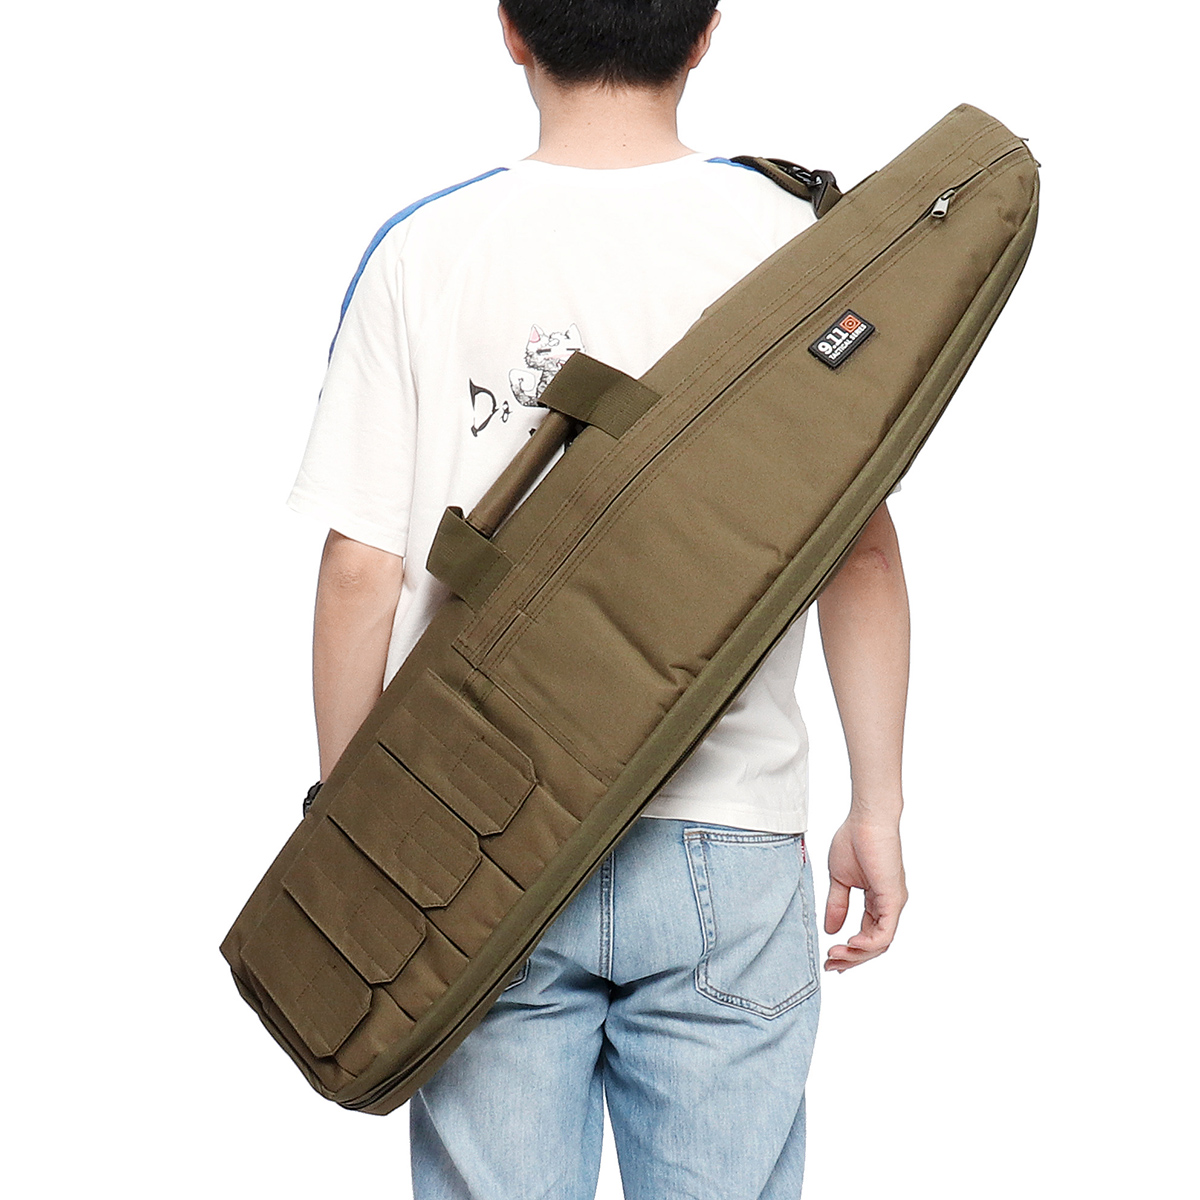 100x25x5cm-Outdoor-Hunting-Tactical-Bag-CS-Airsoft-Case-Tactical-Package-Heavy-Duty-Hunting-Accessor-1519991-6